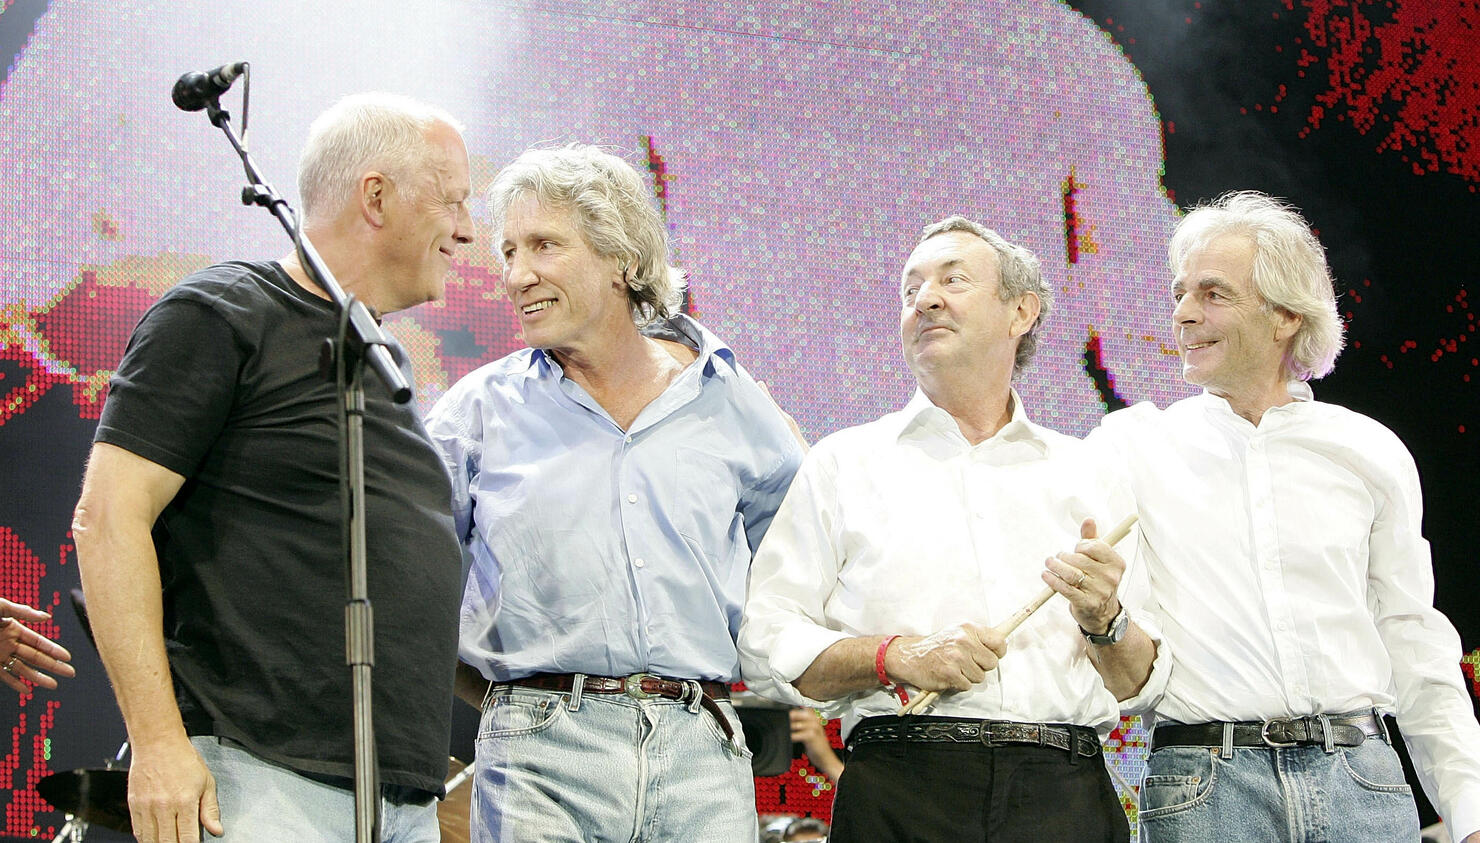 Nick Mason Says He Hopes Roger Waters, David Gilmour Can Reconcile